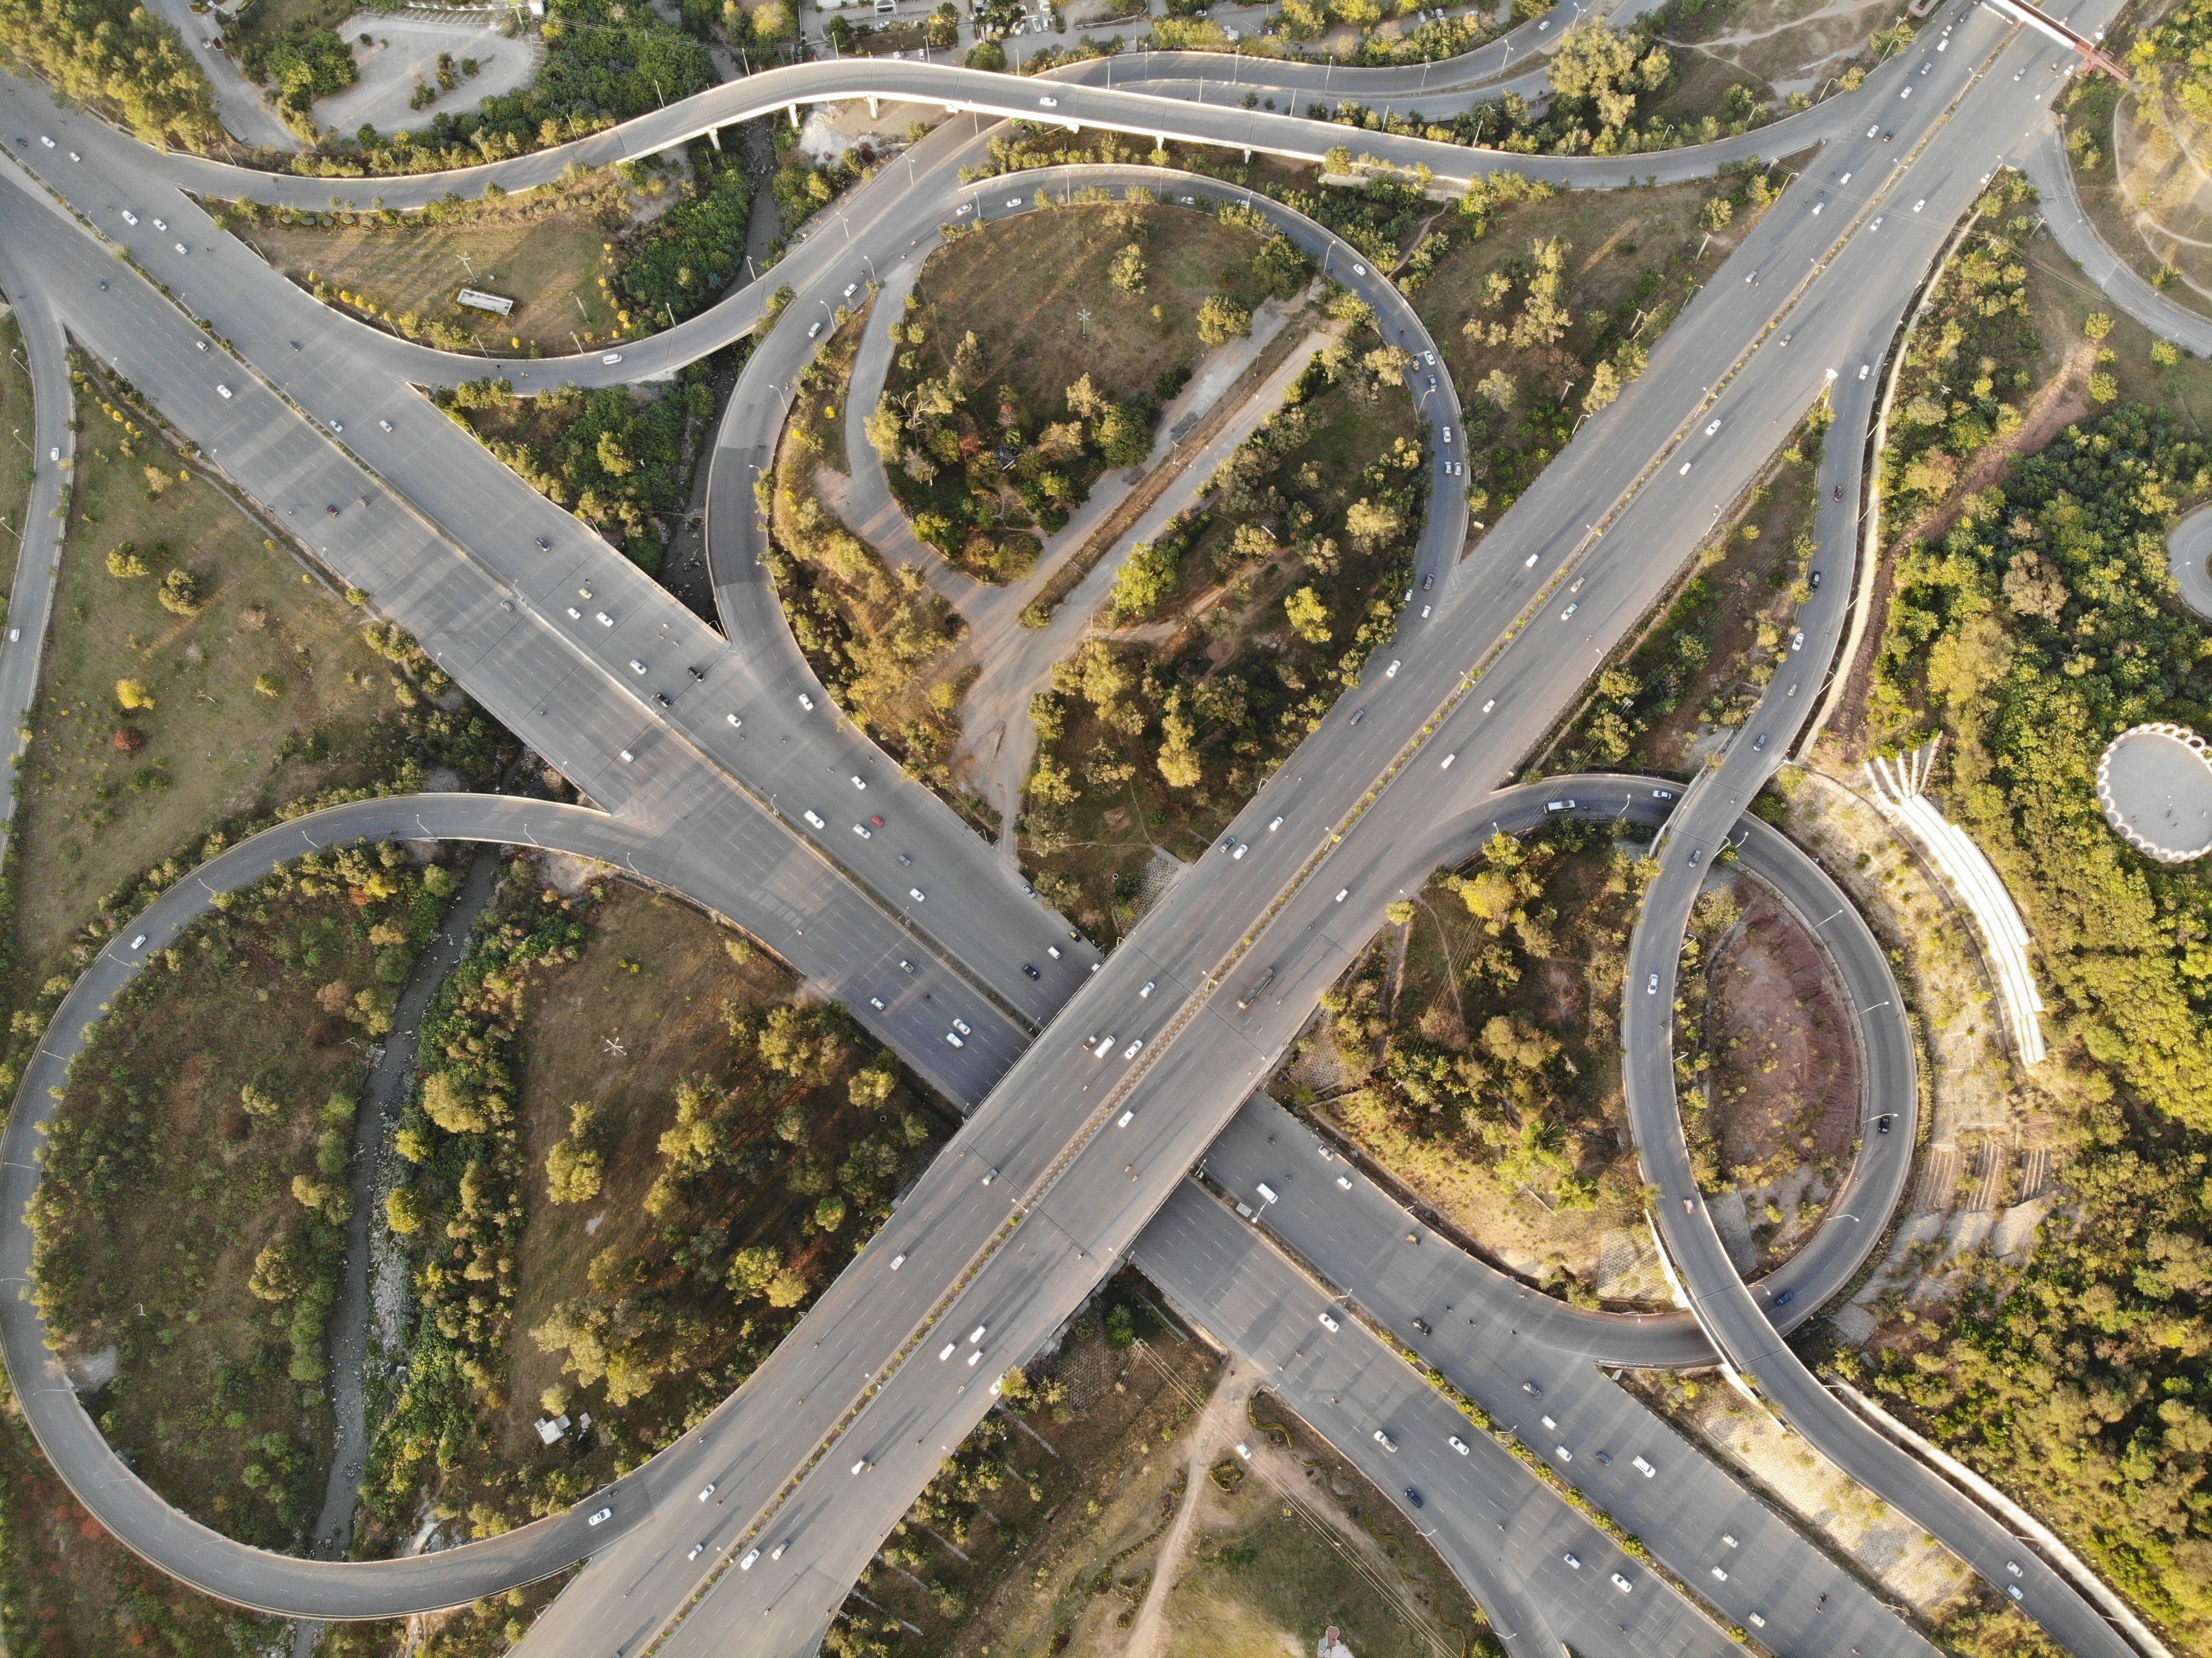 Pictured - An aerial photograph of a concrete road | Source: Pexels 